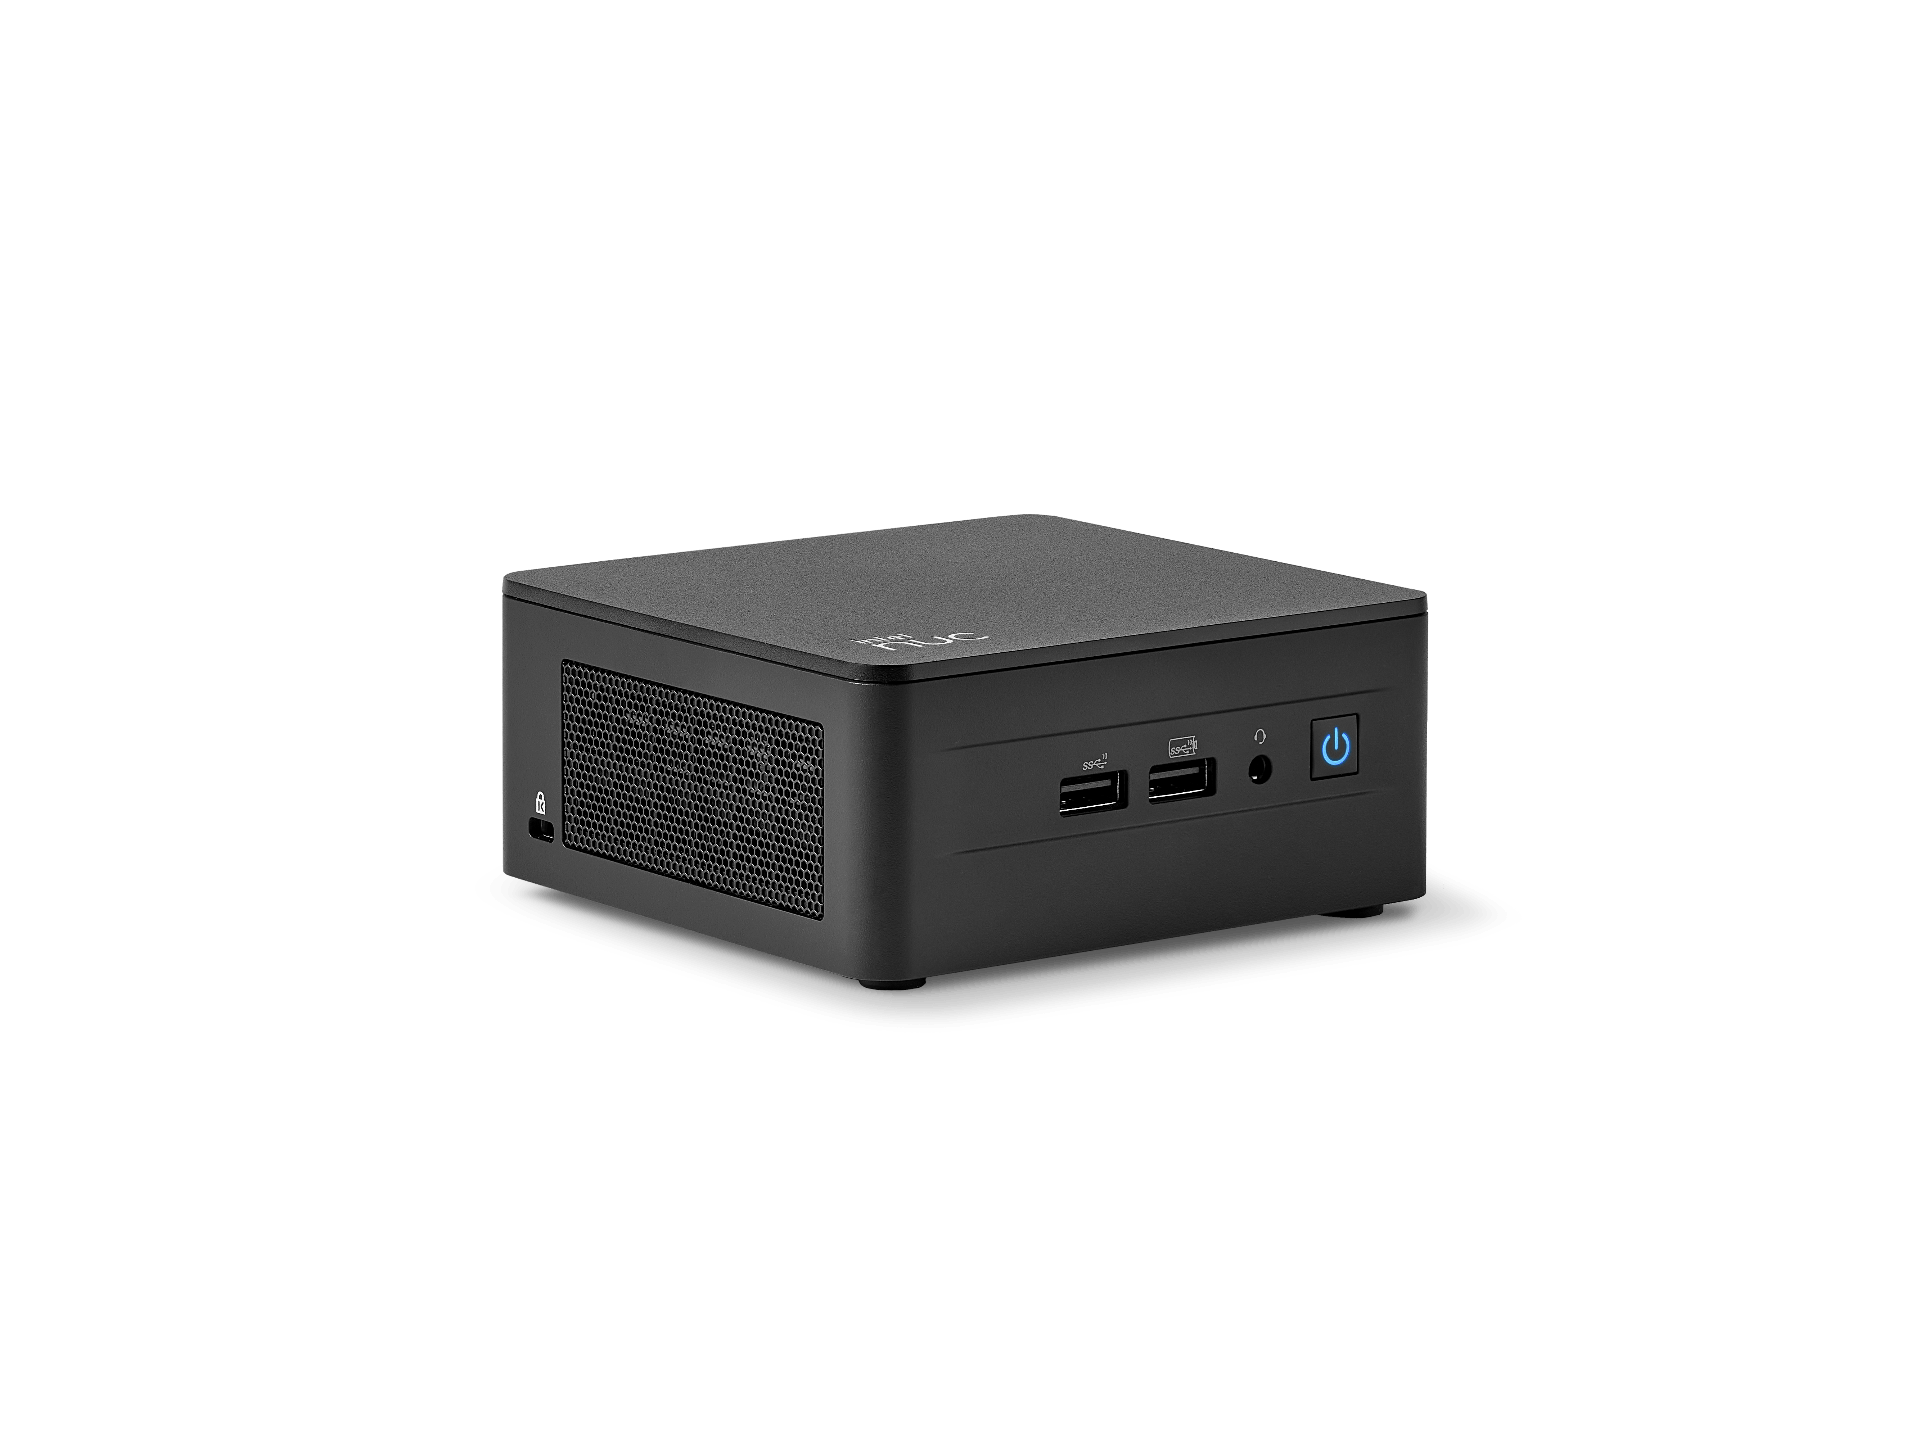  Mini PC Barebone: Intel 13th Gen. NUC, i5-1340P up to 4.60 GHz, 12MB Cache, DDR4(0/2), M.2 Drive & 2.5" HDD, Wi-Fi 6E + Bluetooth, 2xHDMI/2xUSB-C <br><font color='red'>(NO POWER CABLE, optional CB PW 3P power cable)  